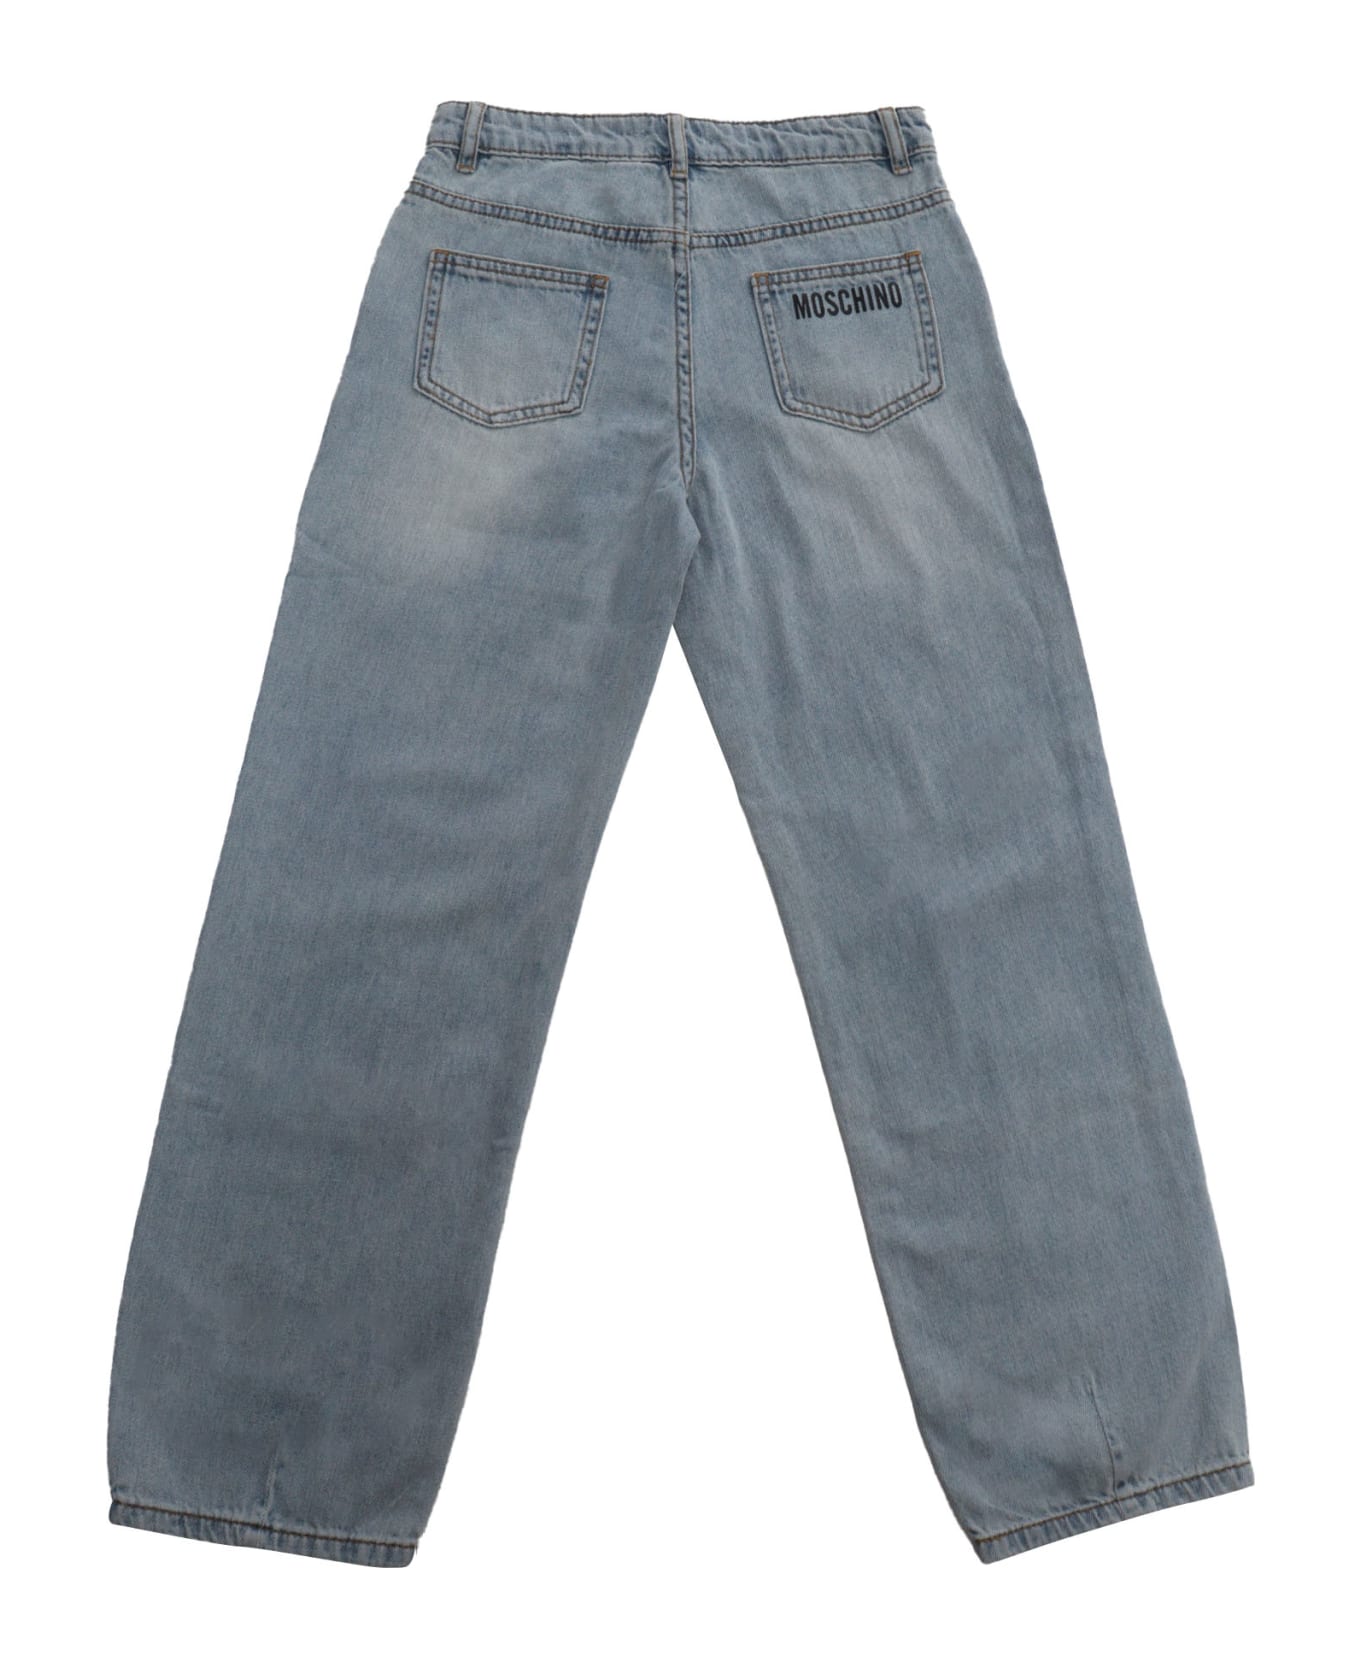 Moschino Baggy Jeans - LIGHT BLUE ボトムス